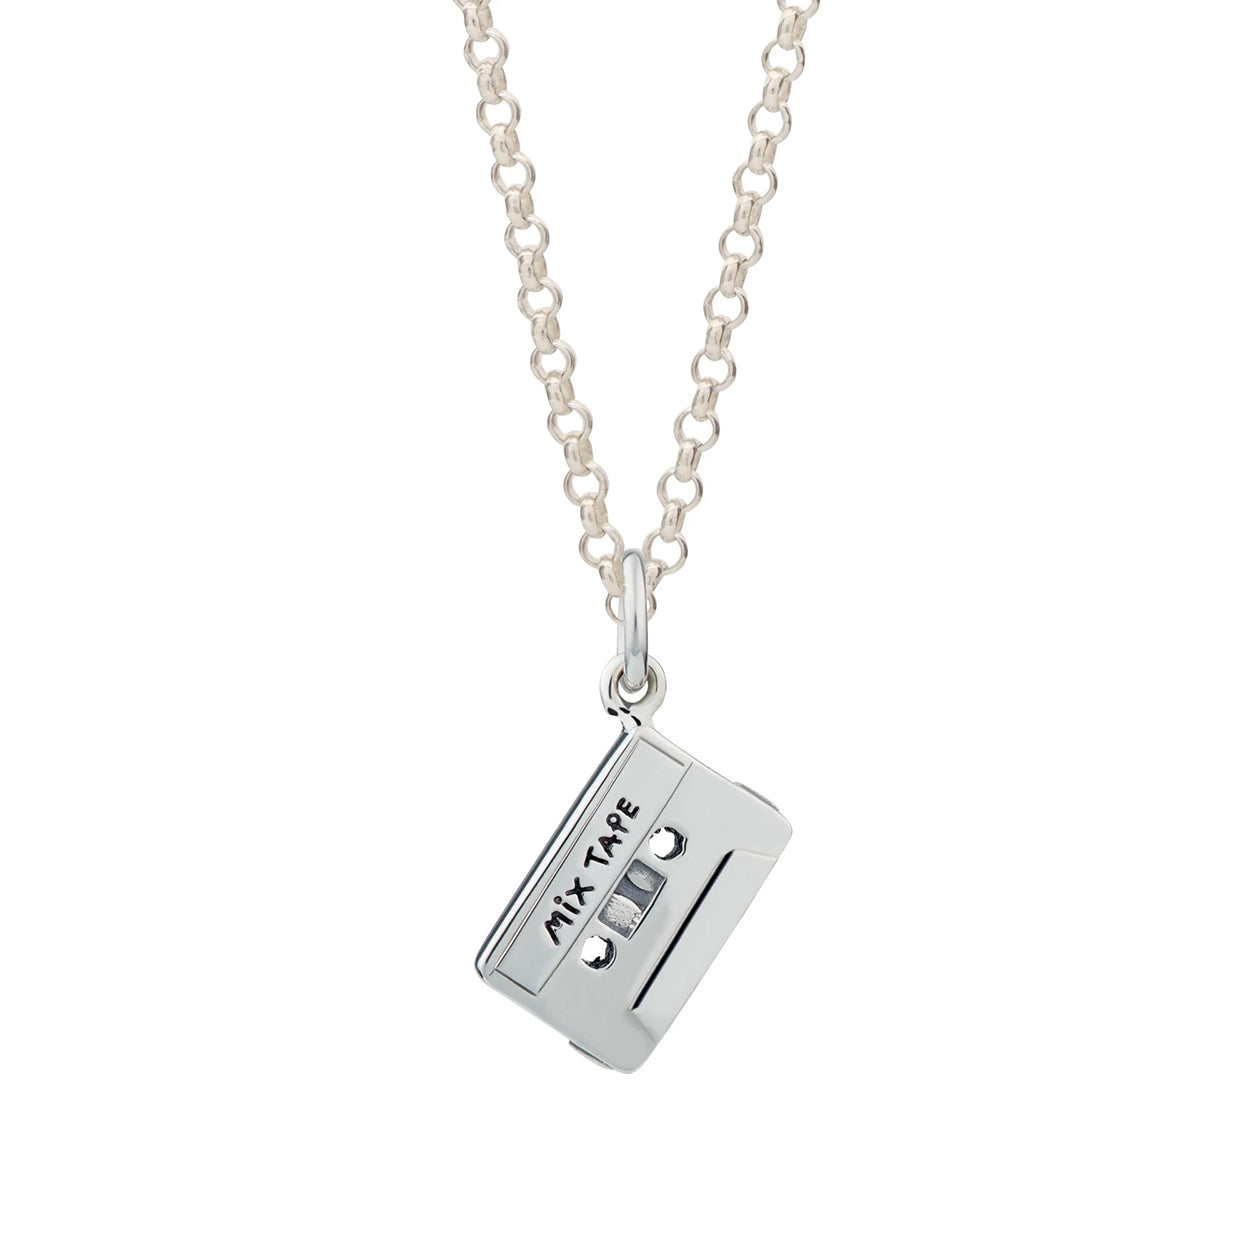 Sterling silver mixtape necklace